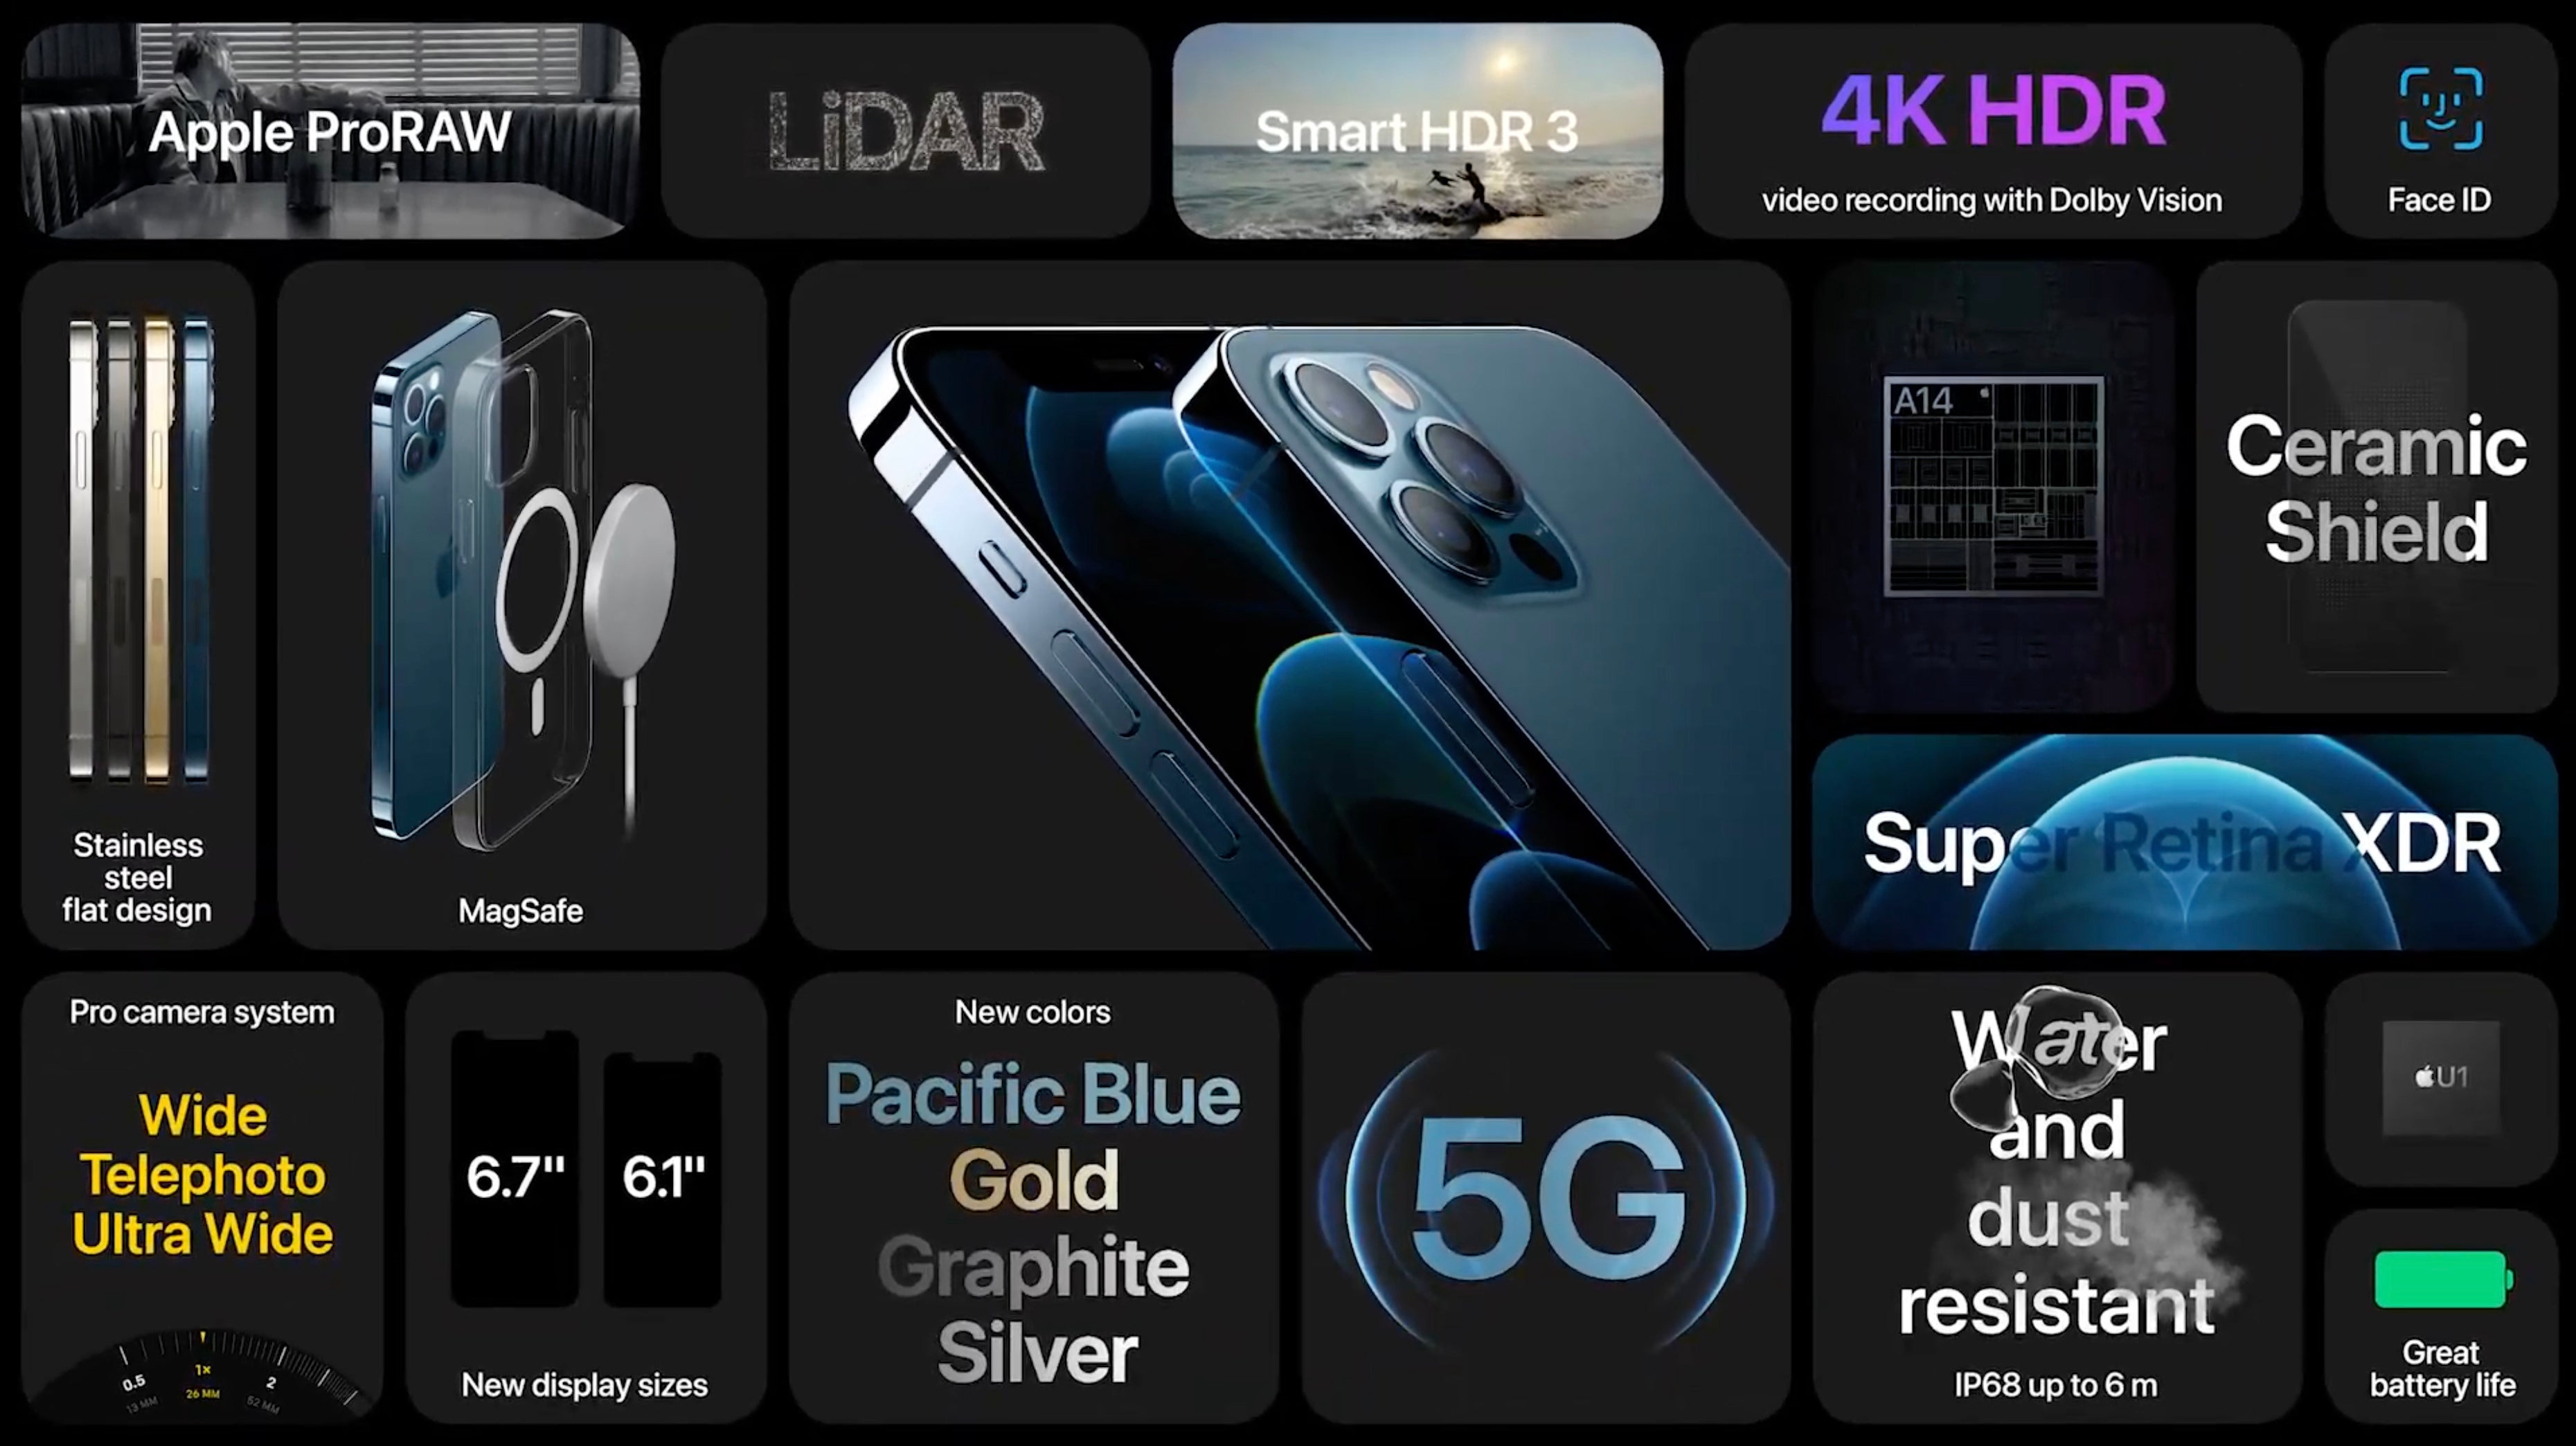 A summary of new features in the iPhone 12 Pro series - Apple officially unveils iPhone 12 Pro and Pro Max